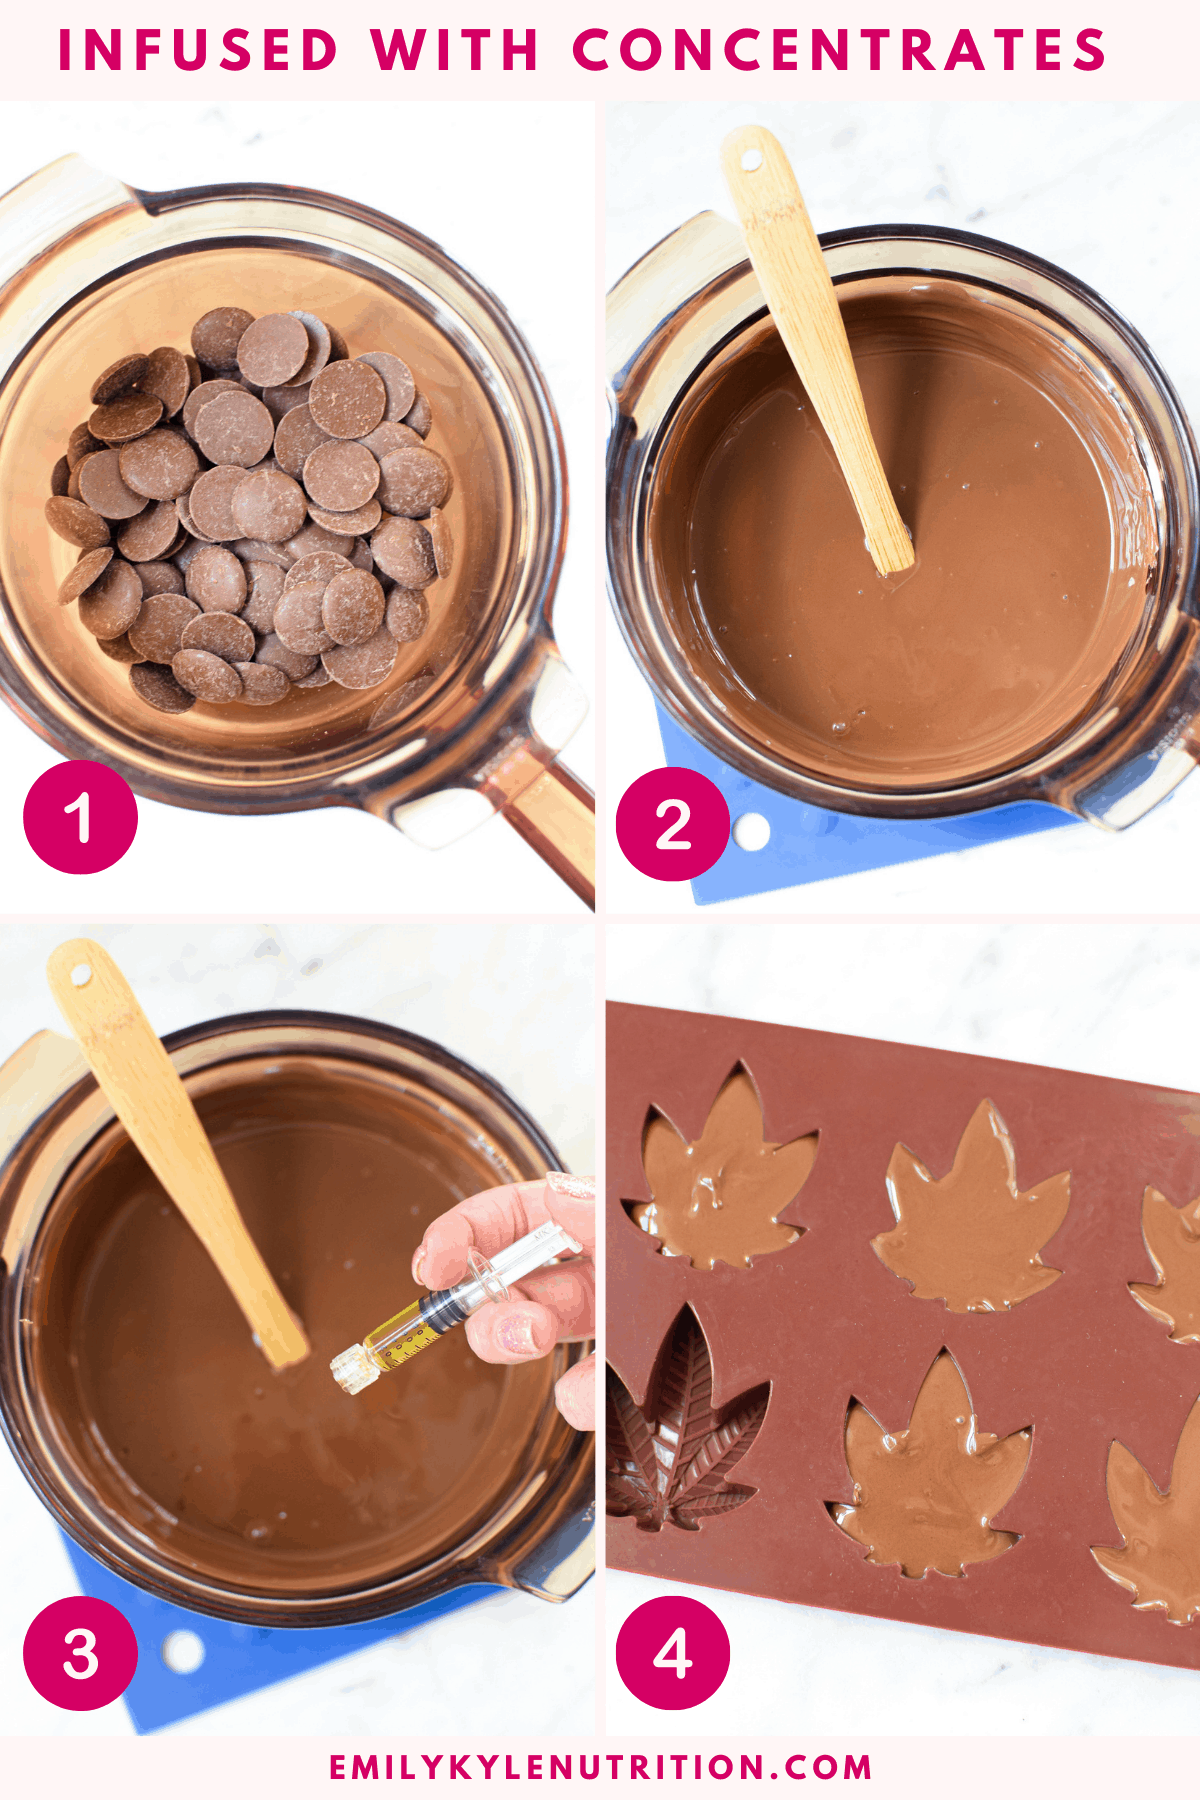 A 4 step collage showing how to infuse cannabis concentrates into chocolate using a double boiler to melt the chocolate, stirring it smooth, and pouring into a mold